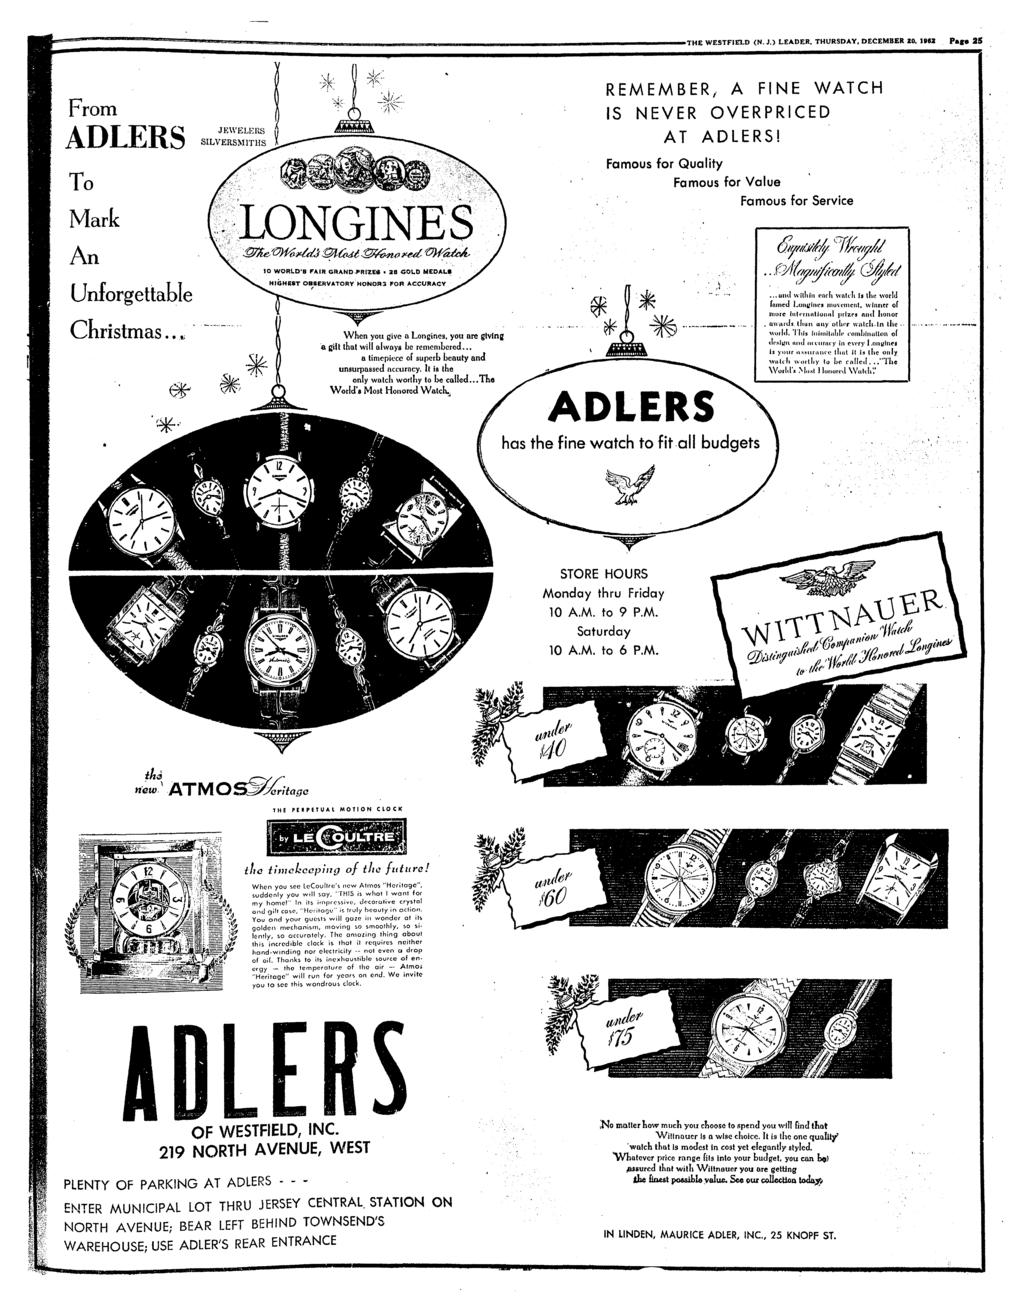 THE WESTFIELD (N. J.) LEADER, THURSDAY, DECEMBER 20. 1962 Page 25 From ADLERS To Mark An Unforgettable Chrstmas..* JKWELERS SILVERSMITHS sk LONGINES 10 WORLD'S PAIR GHAND.